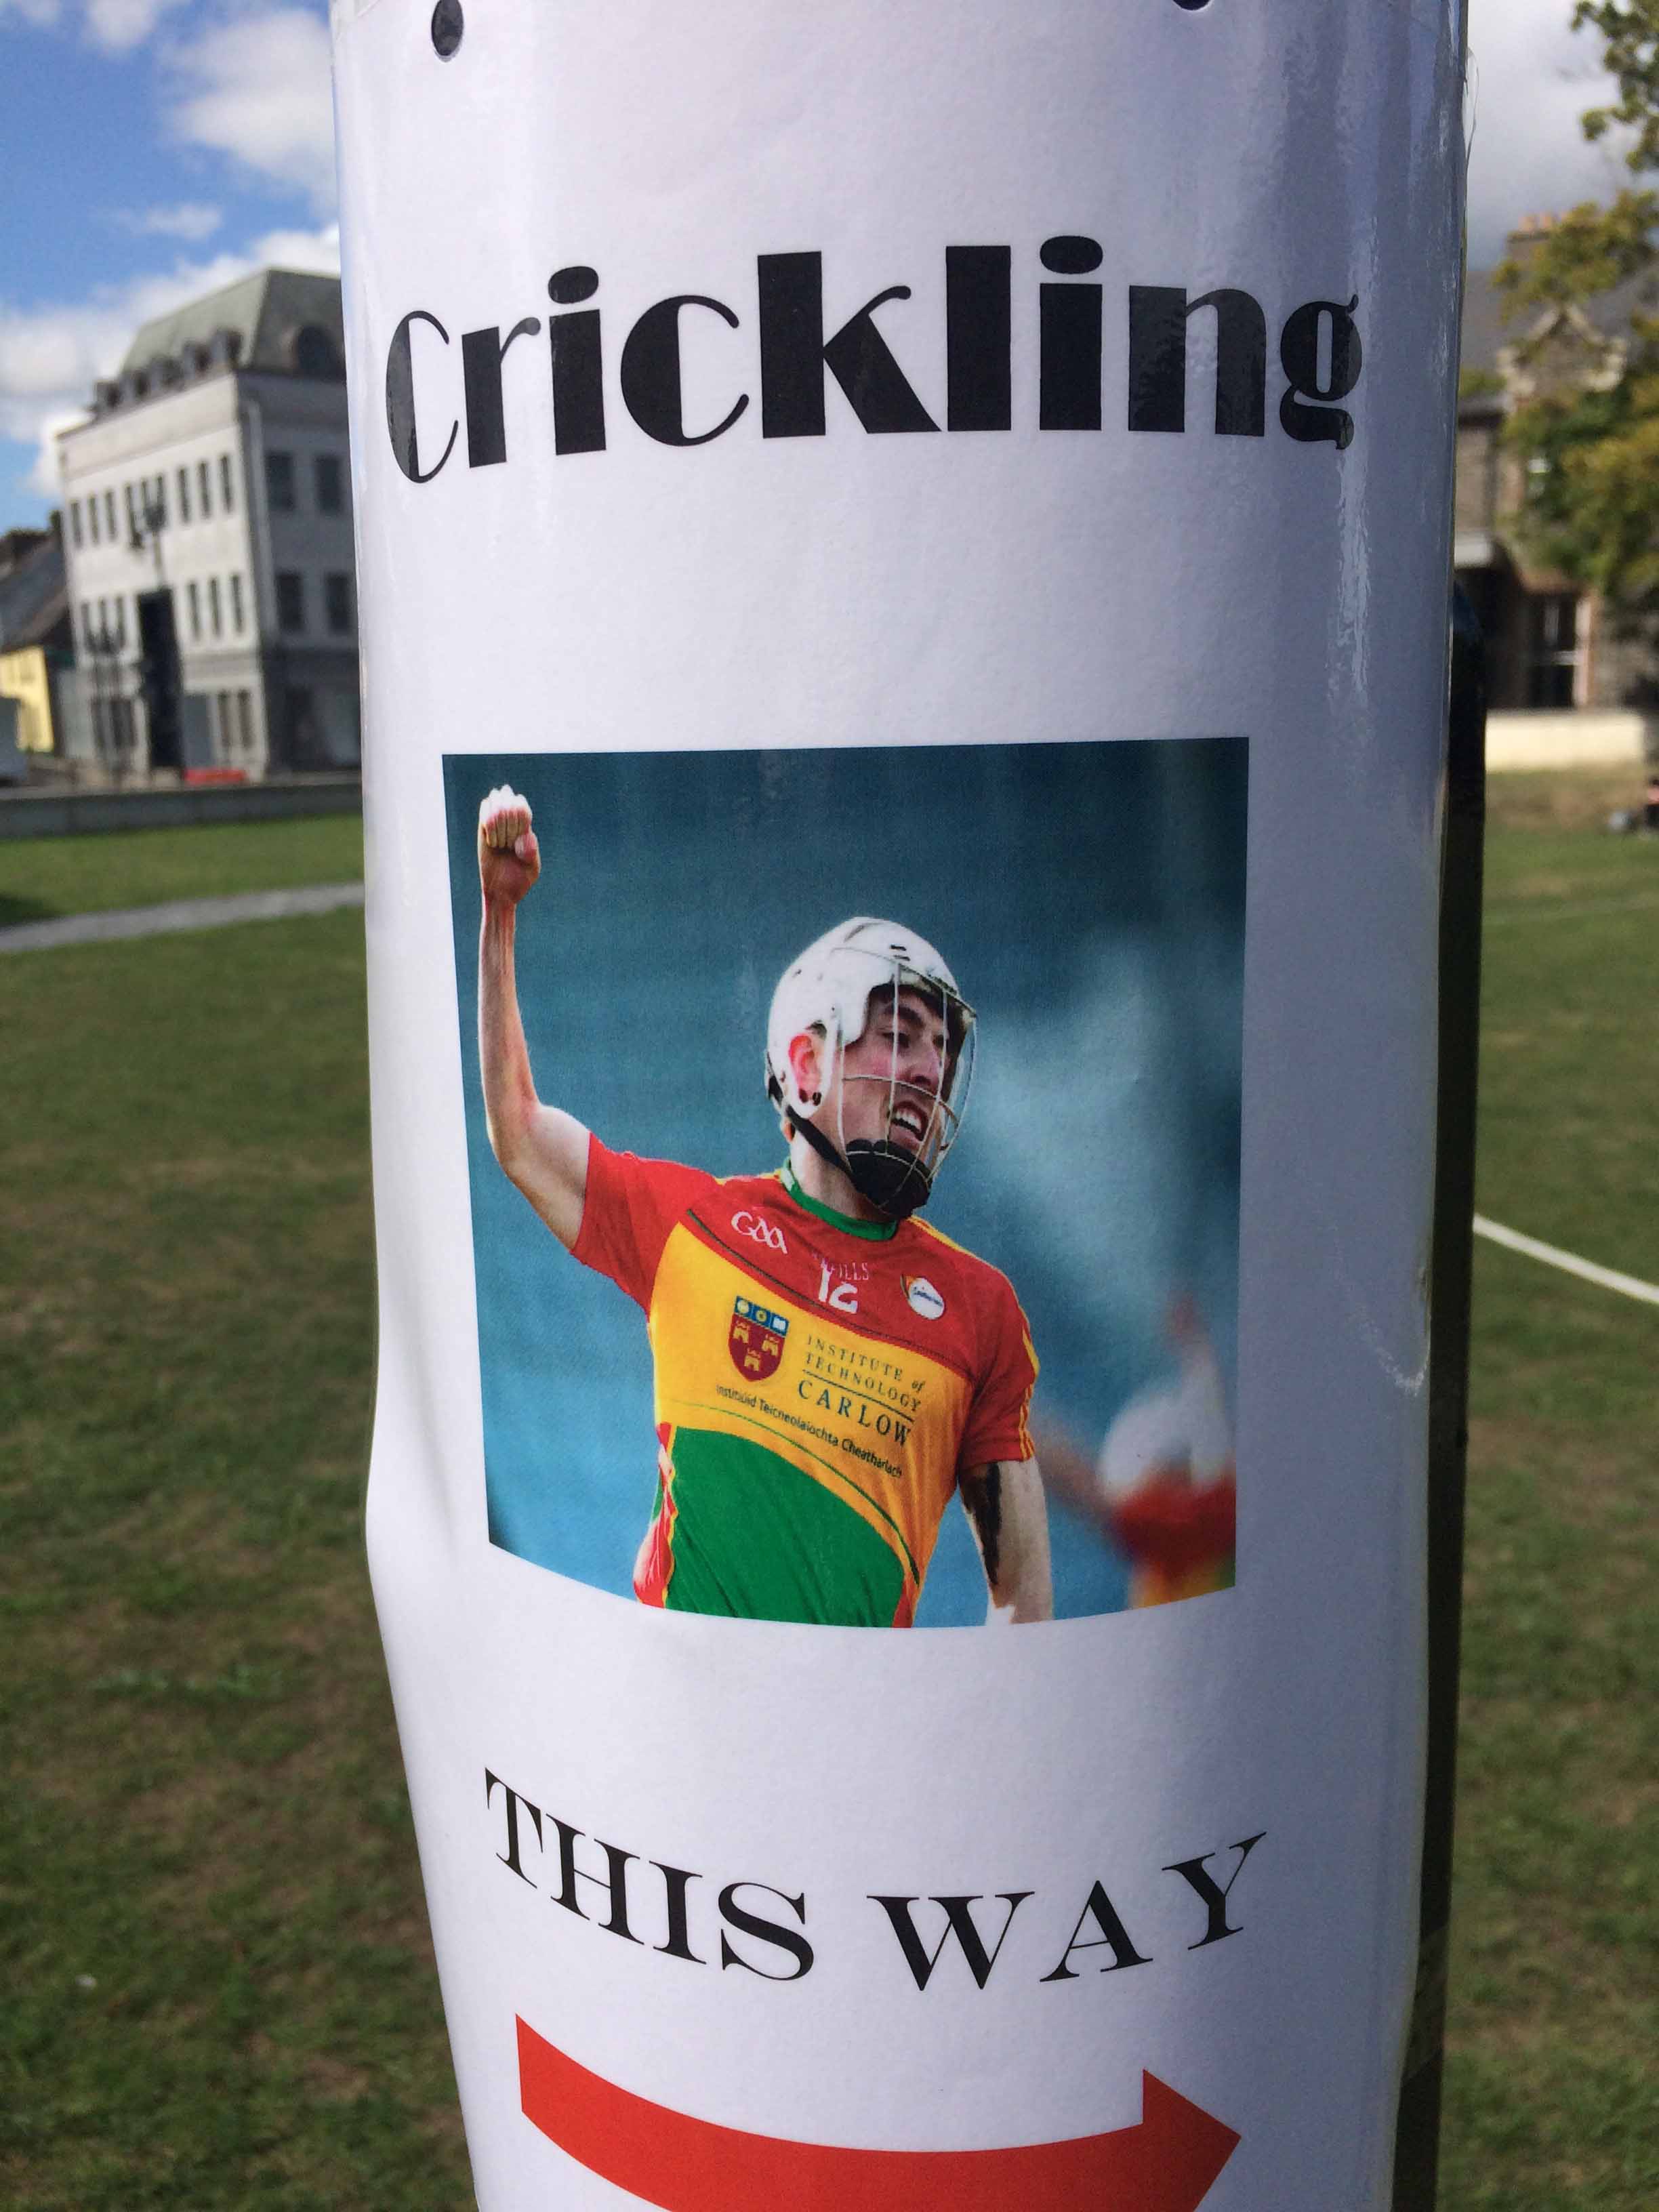 Crickling - a blend of cricket and hurling.